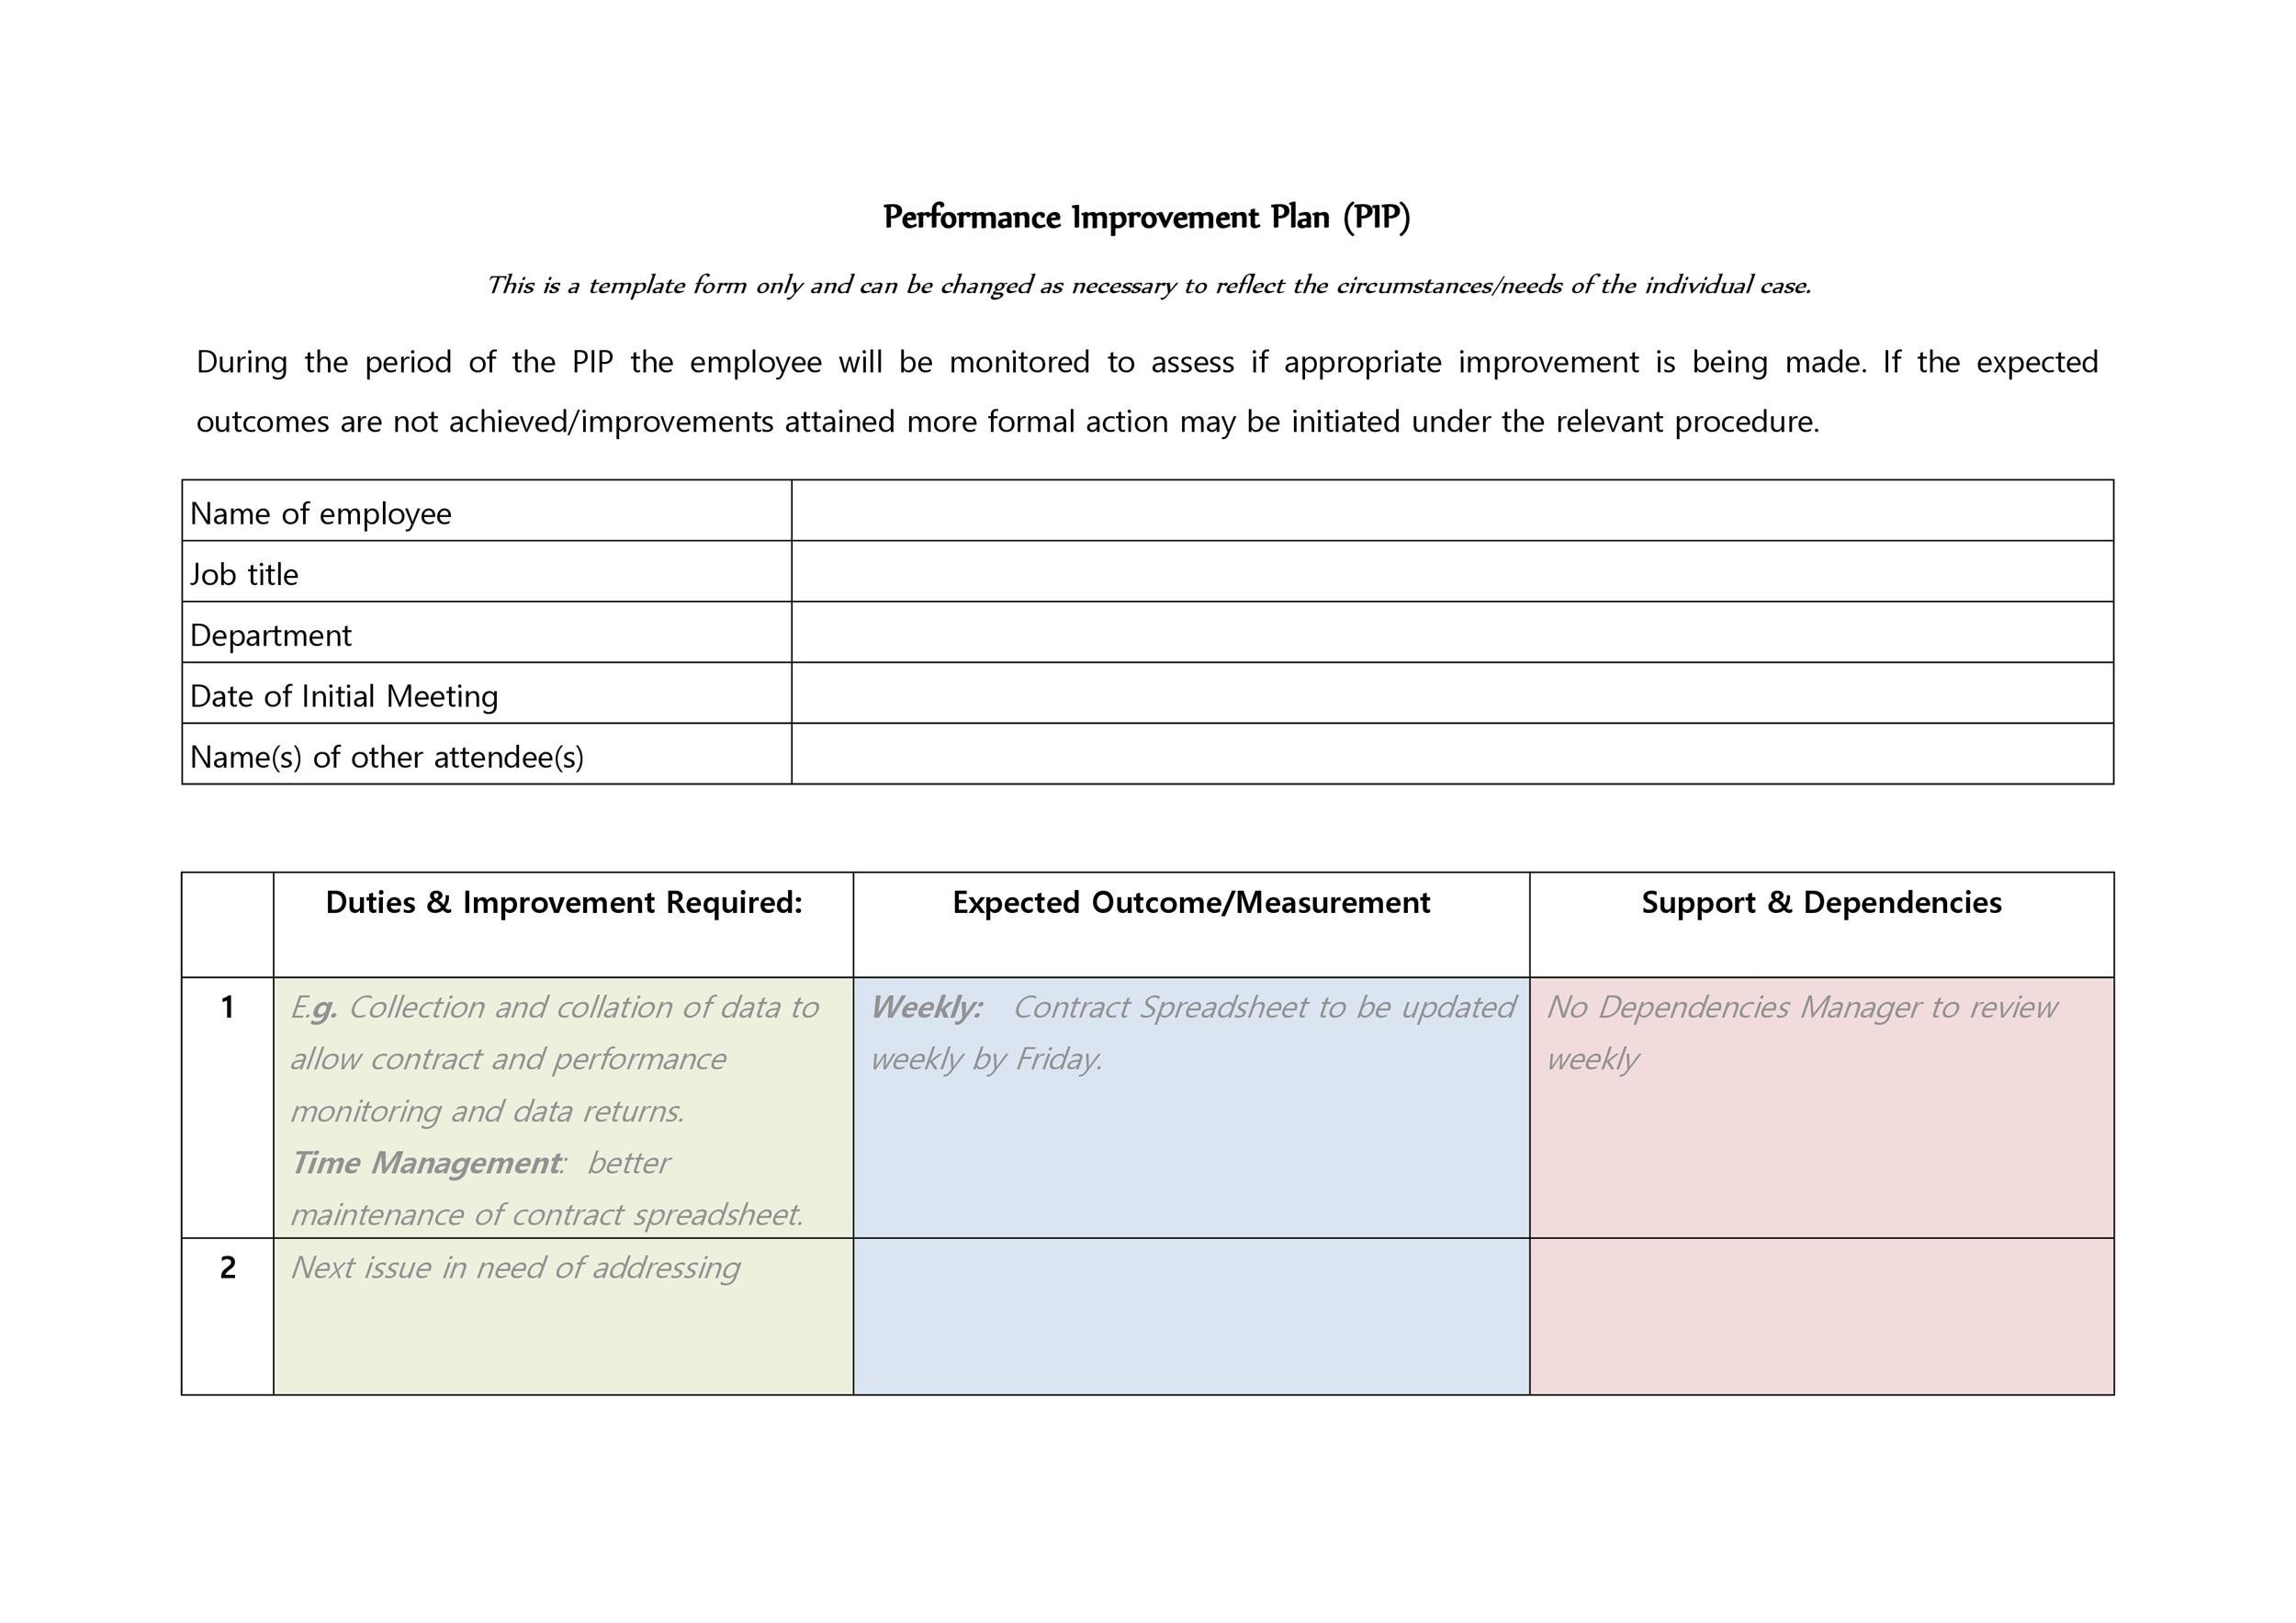 Performance Management Plan Template from templatelab.com